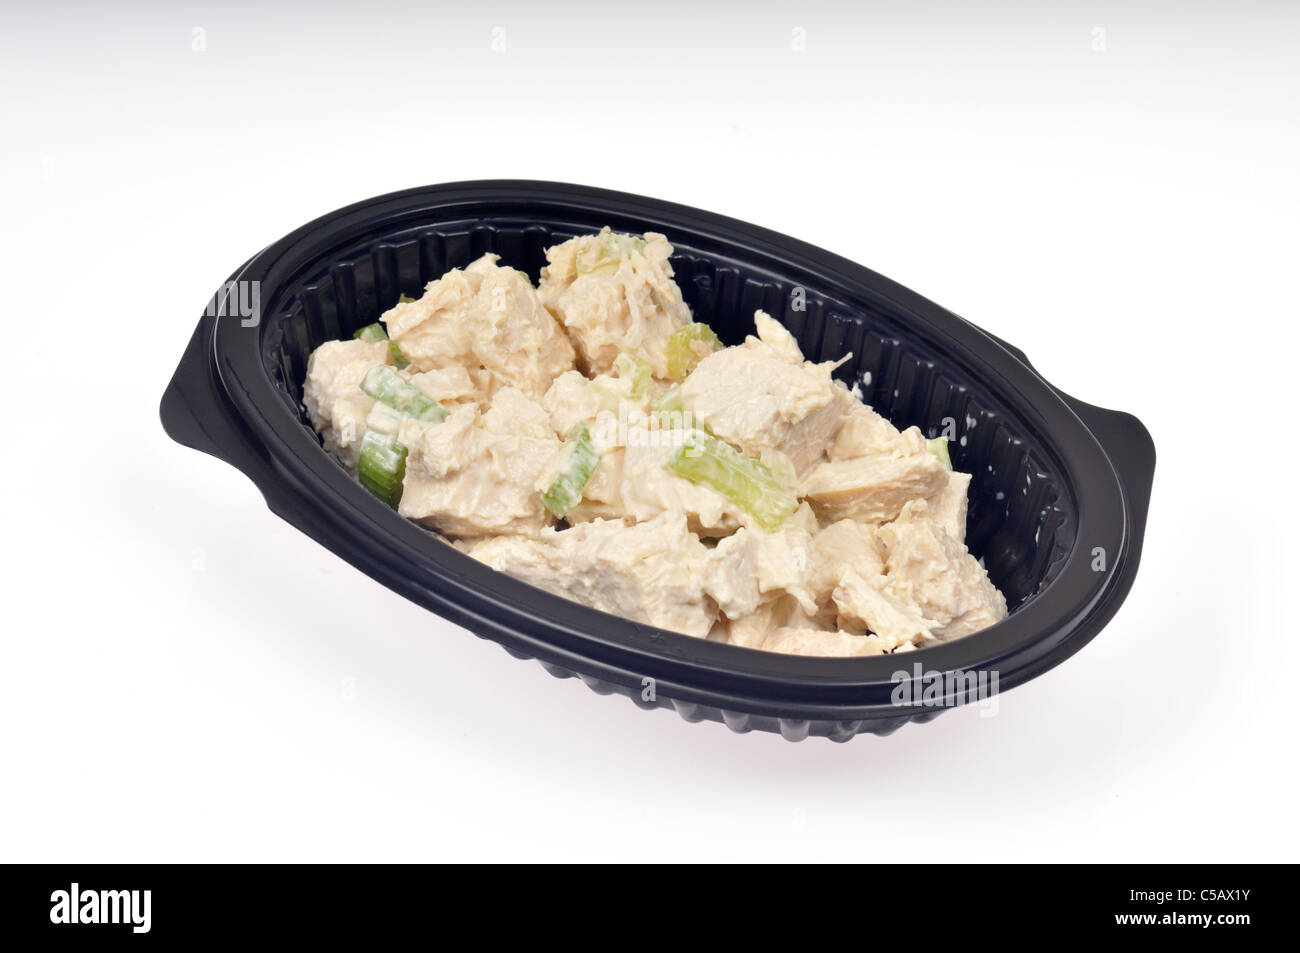 Chicken salad with celery in a black plastic takeaway dish on white background, isolated. Stock Photo